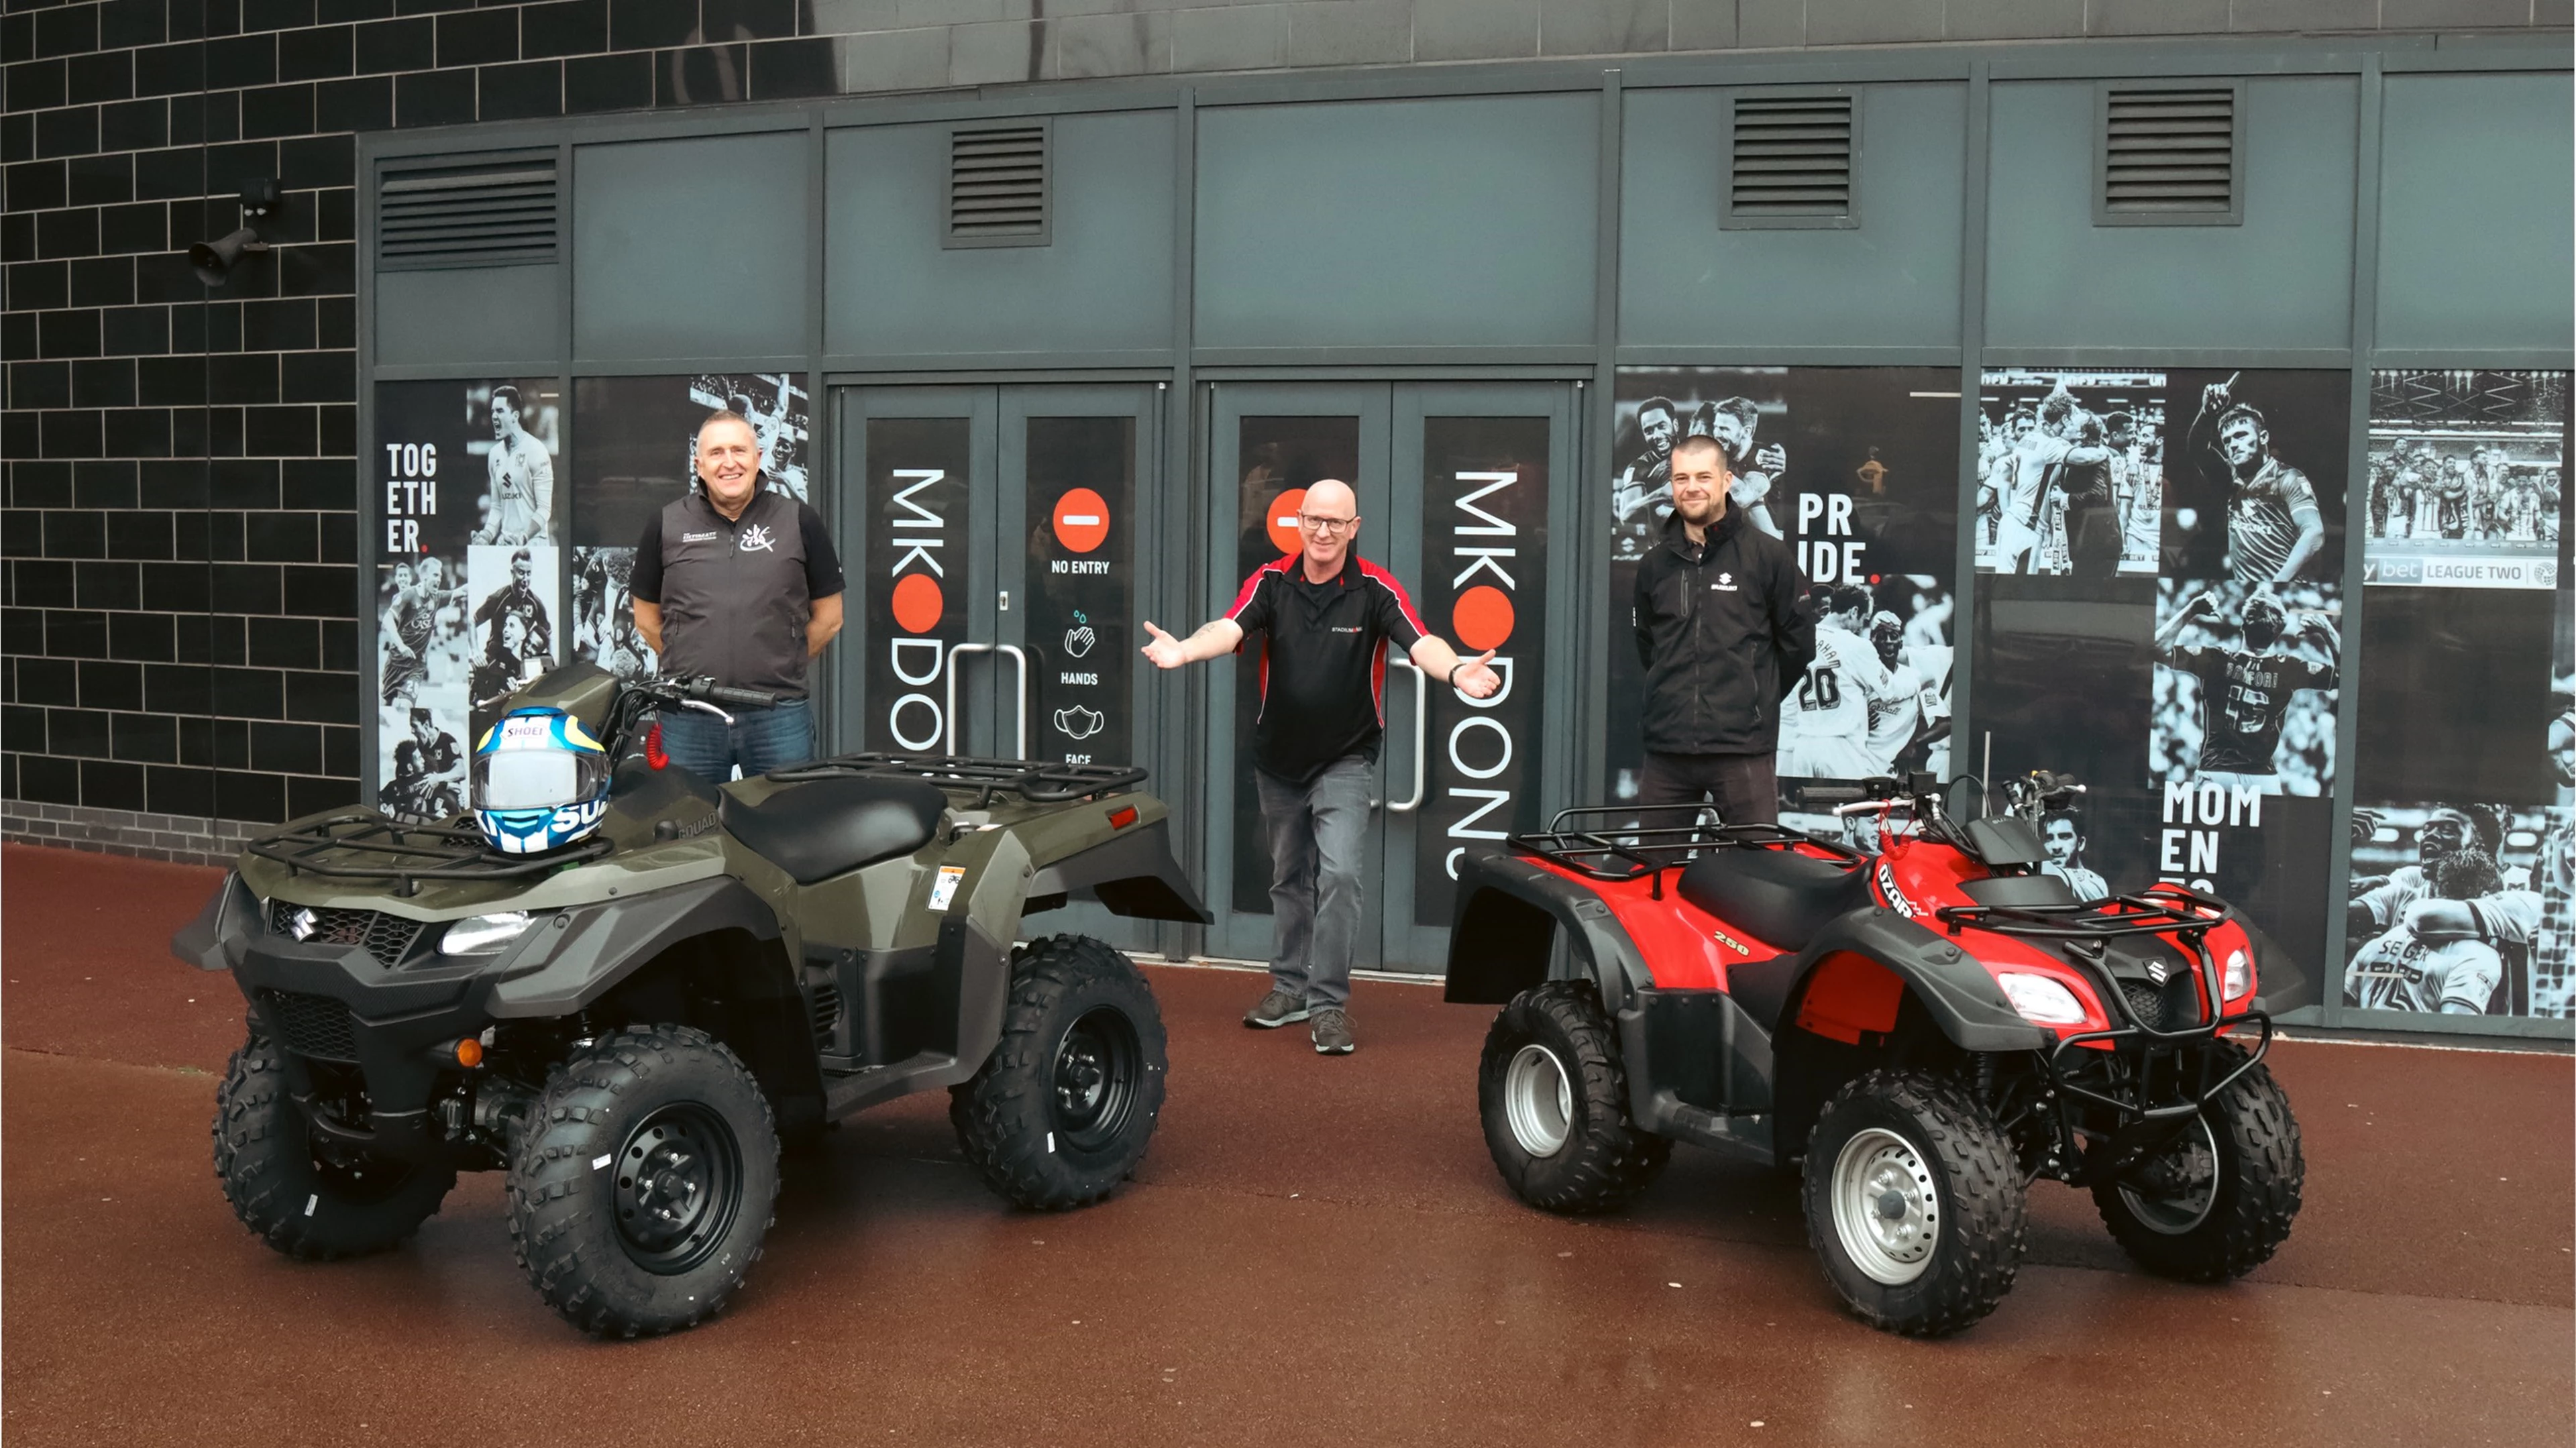 Two Suzuki ATVs outside of MK Dons